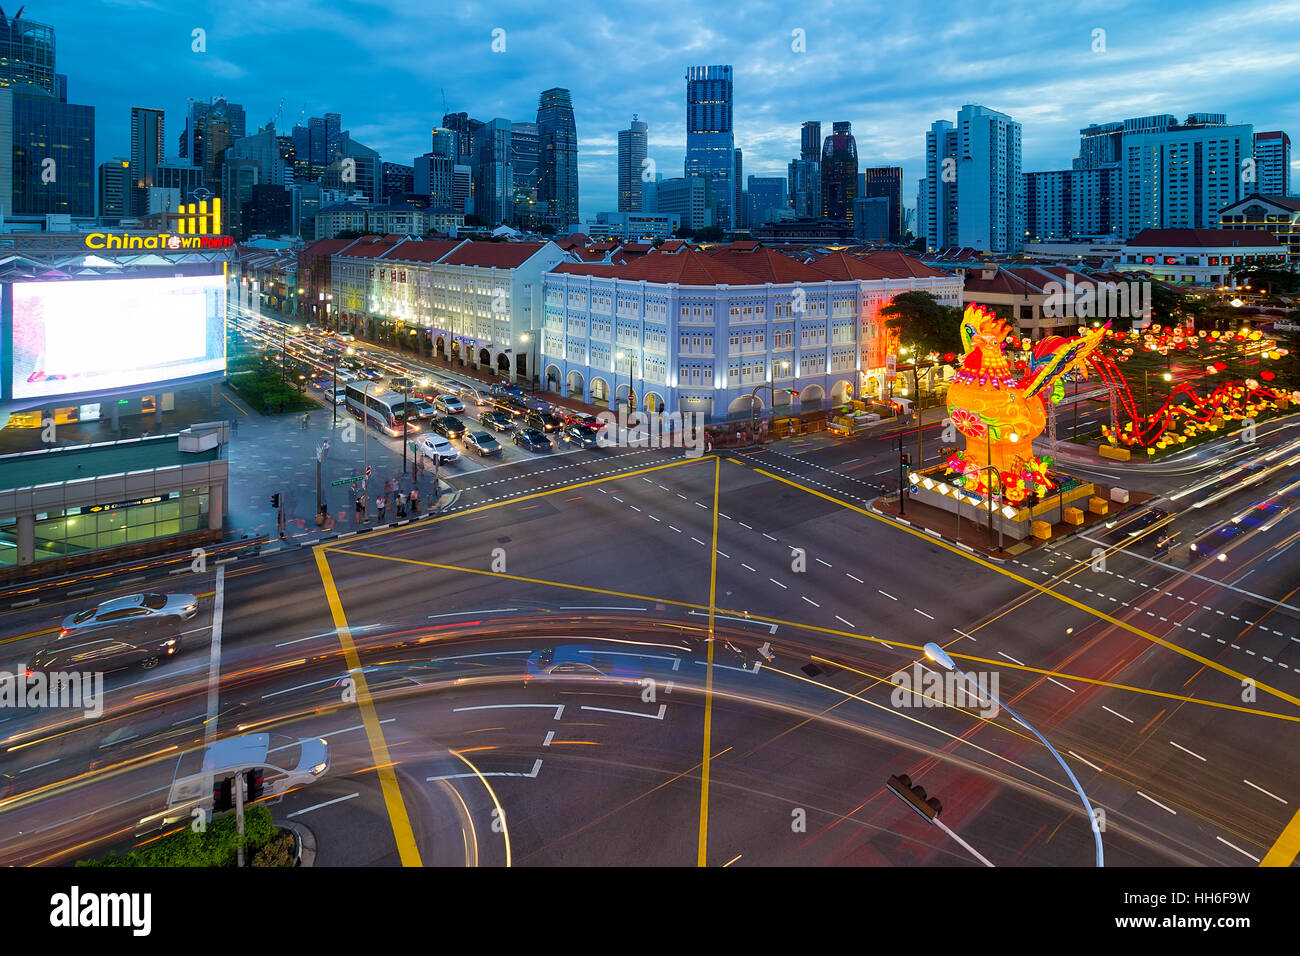 Singapore Chinatown with Lunar Chinese New Year of the Rooster 2017 Street Decoration Lit during evening rush hour Stock Photo